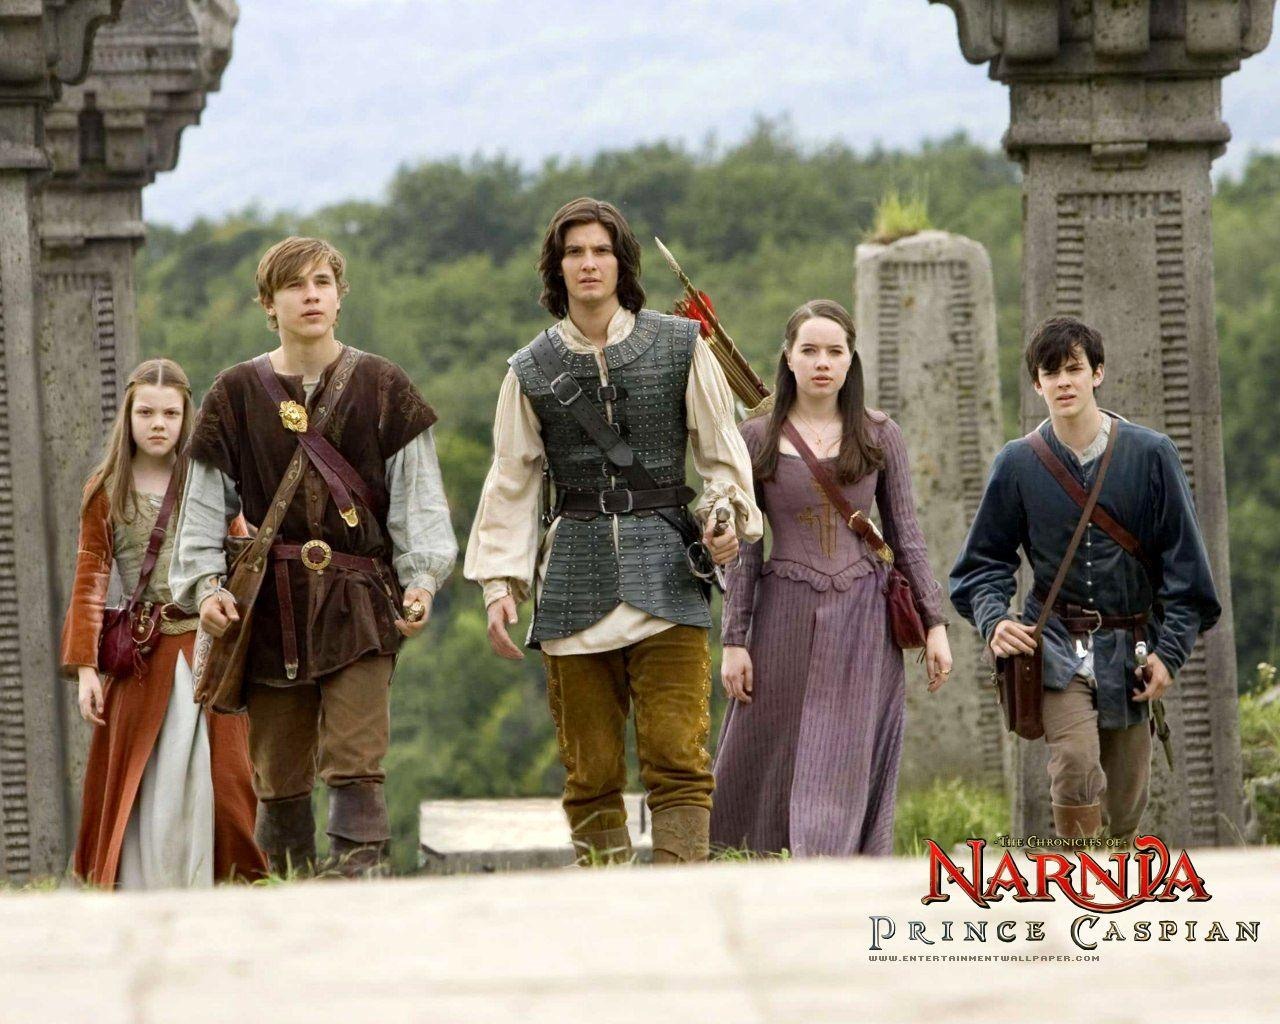 The Chronicles of Narnia 2: Prince Caspian #2 - 1280x1024